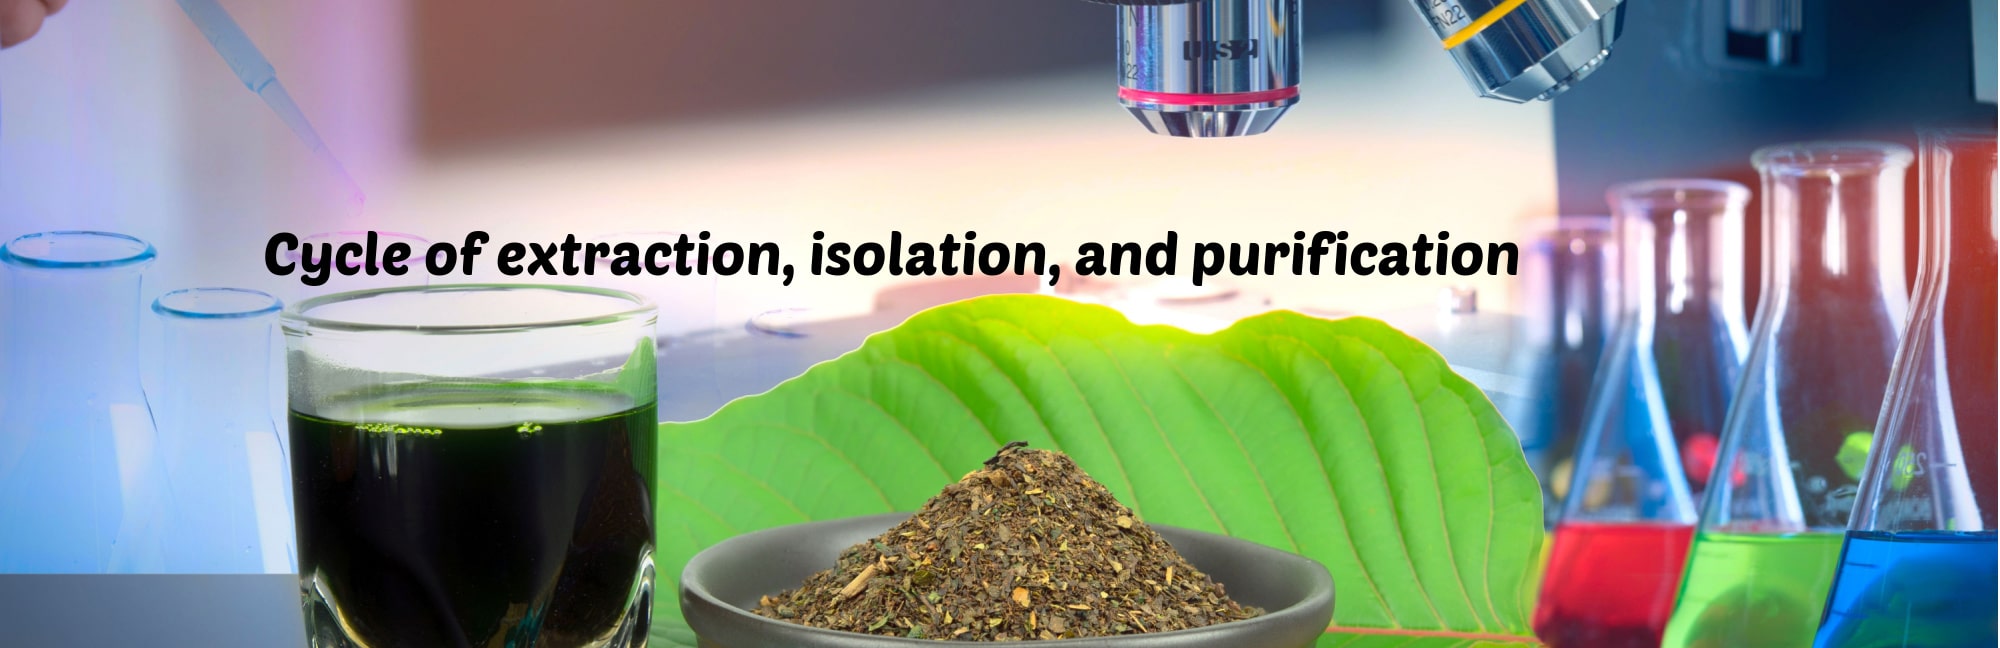 image of cycle of extraction isolation purification